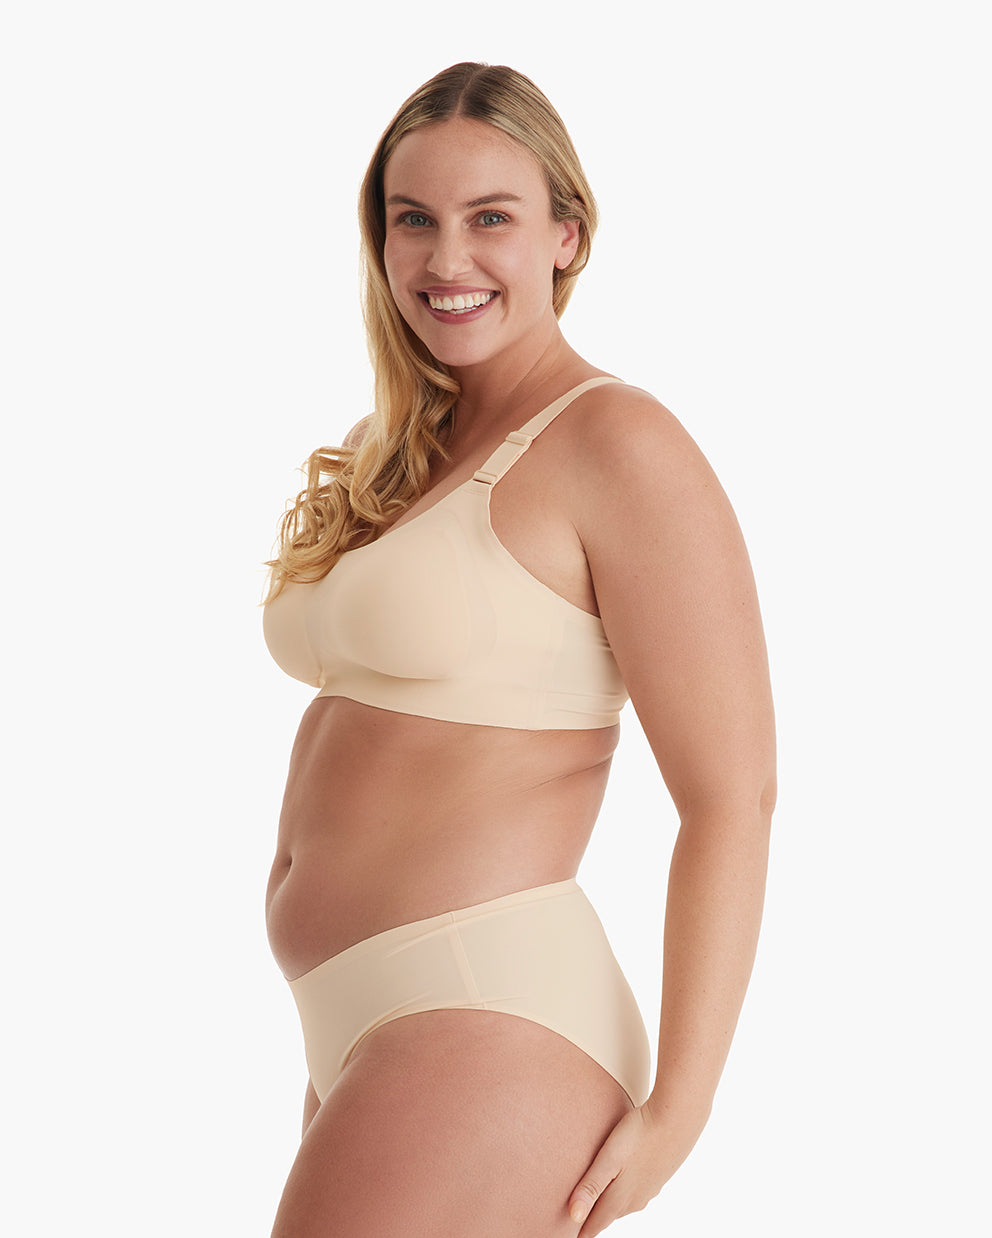 Momcozy Maternity SET of 3 Bras Multiple Size M - $30 (57% Off Retail) -  From Ambar